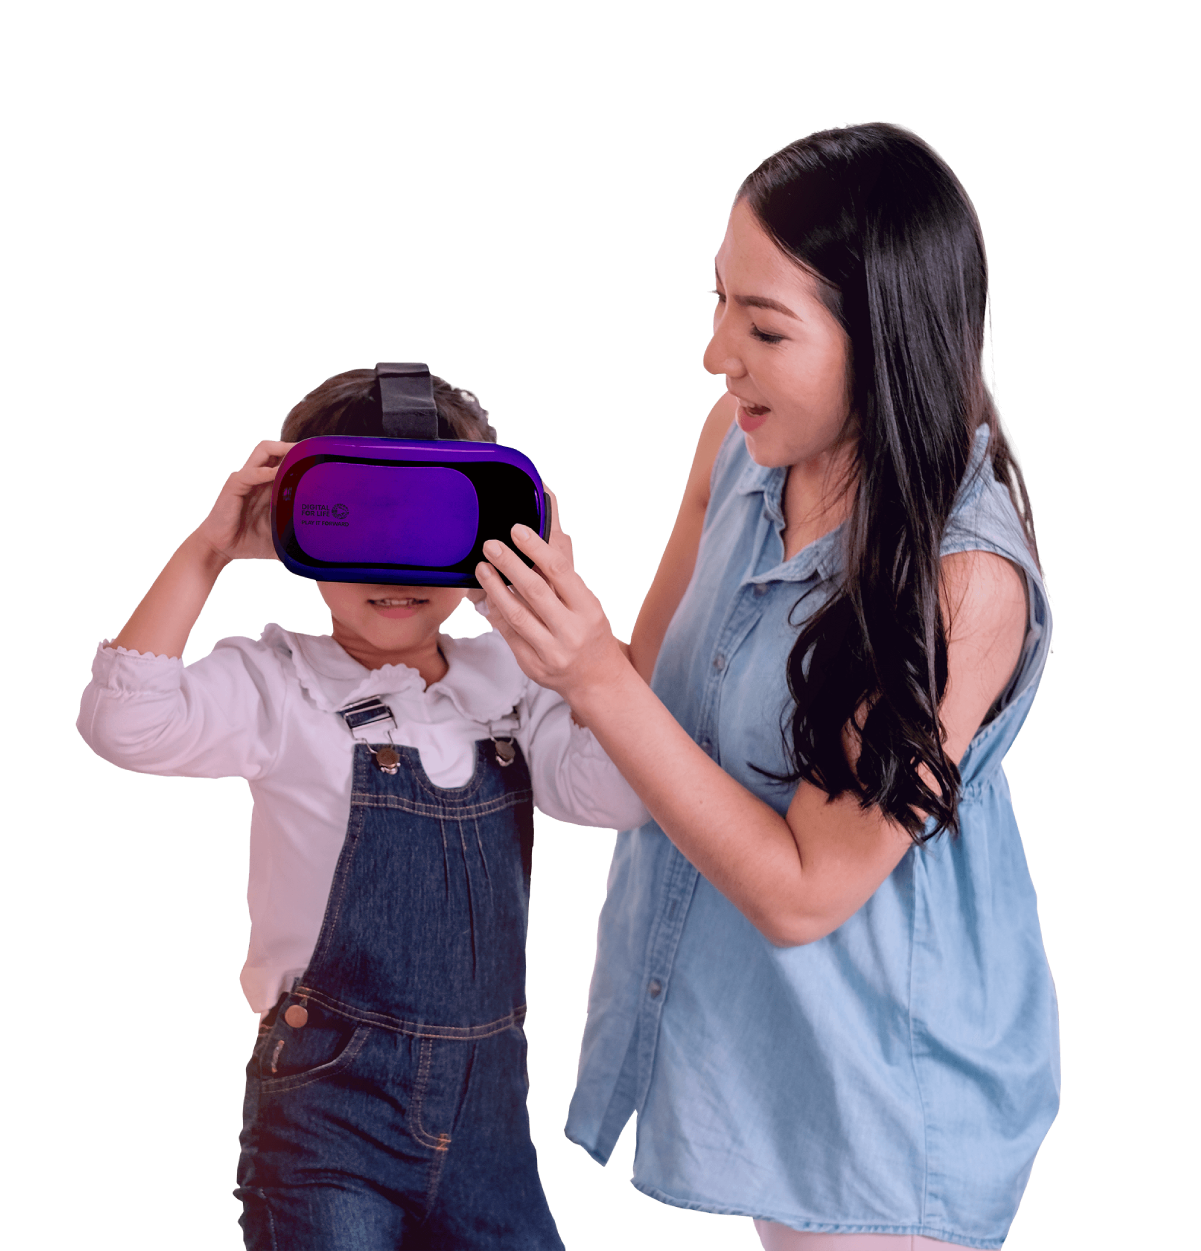 A mother helping her child wear a VR headset